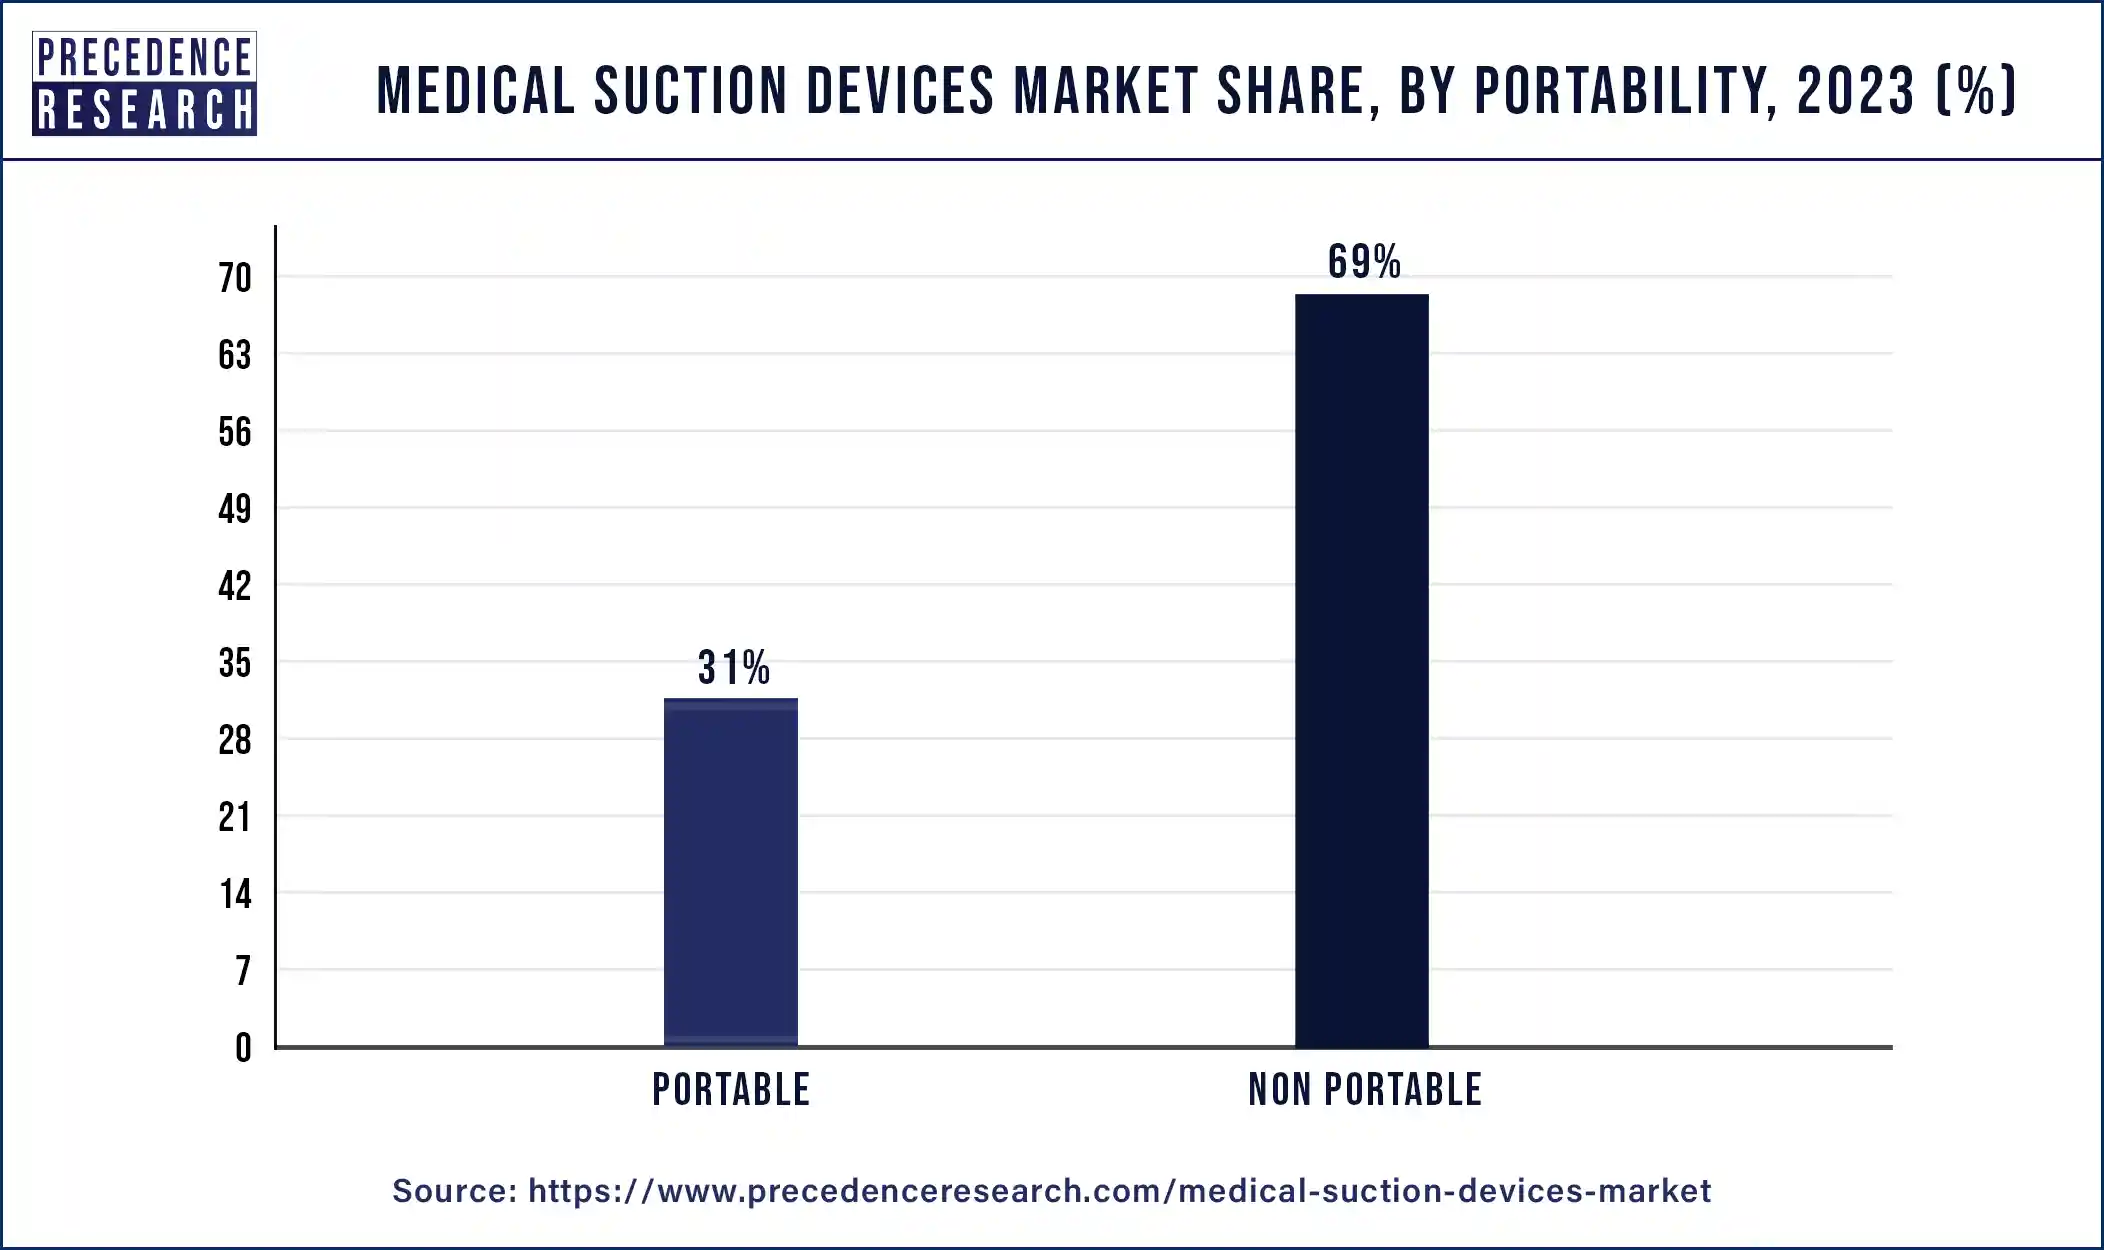 Medical Suction Devices Market Share, By Portability, 2023 (%)